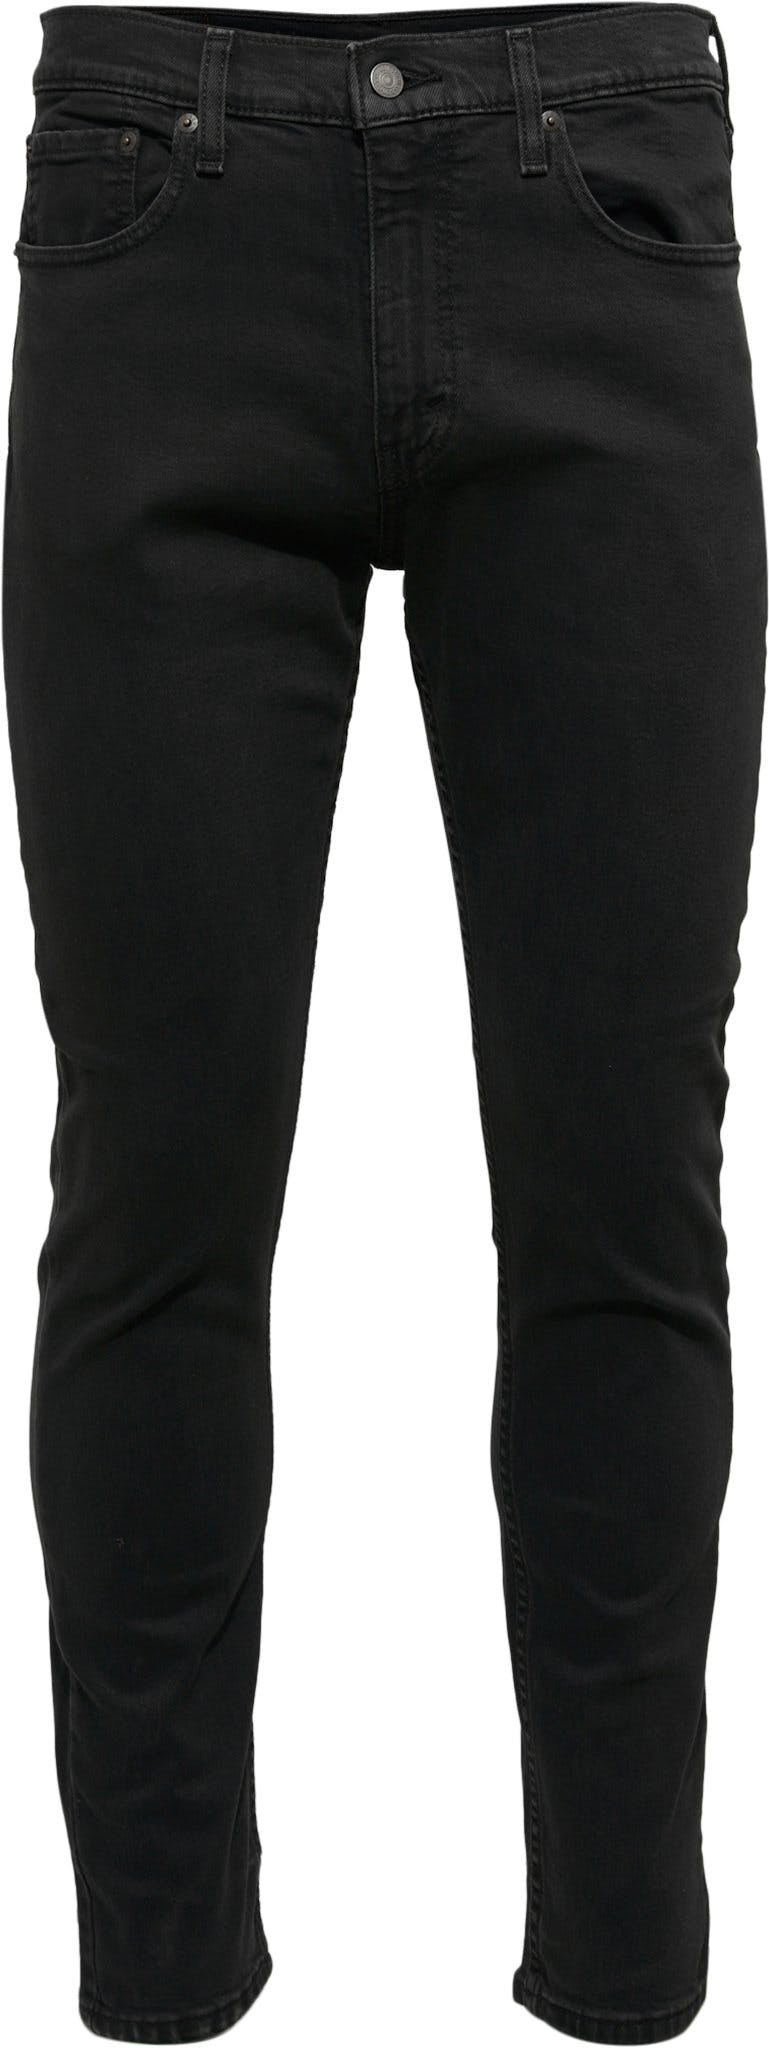 Product image for 512 Slim Taper Fit Jeans - Men's